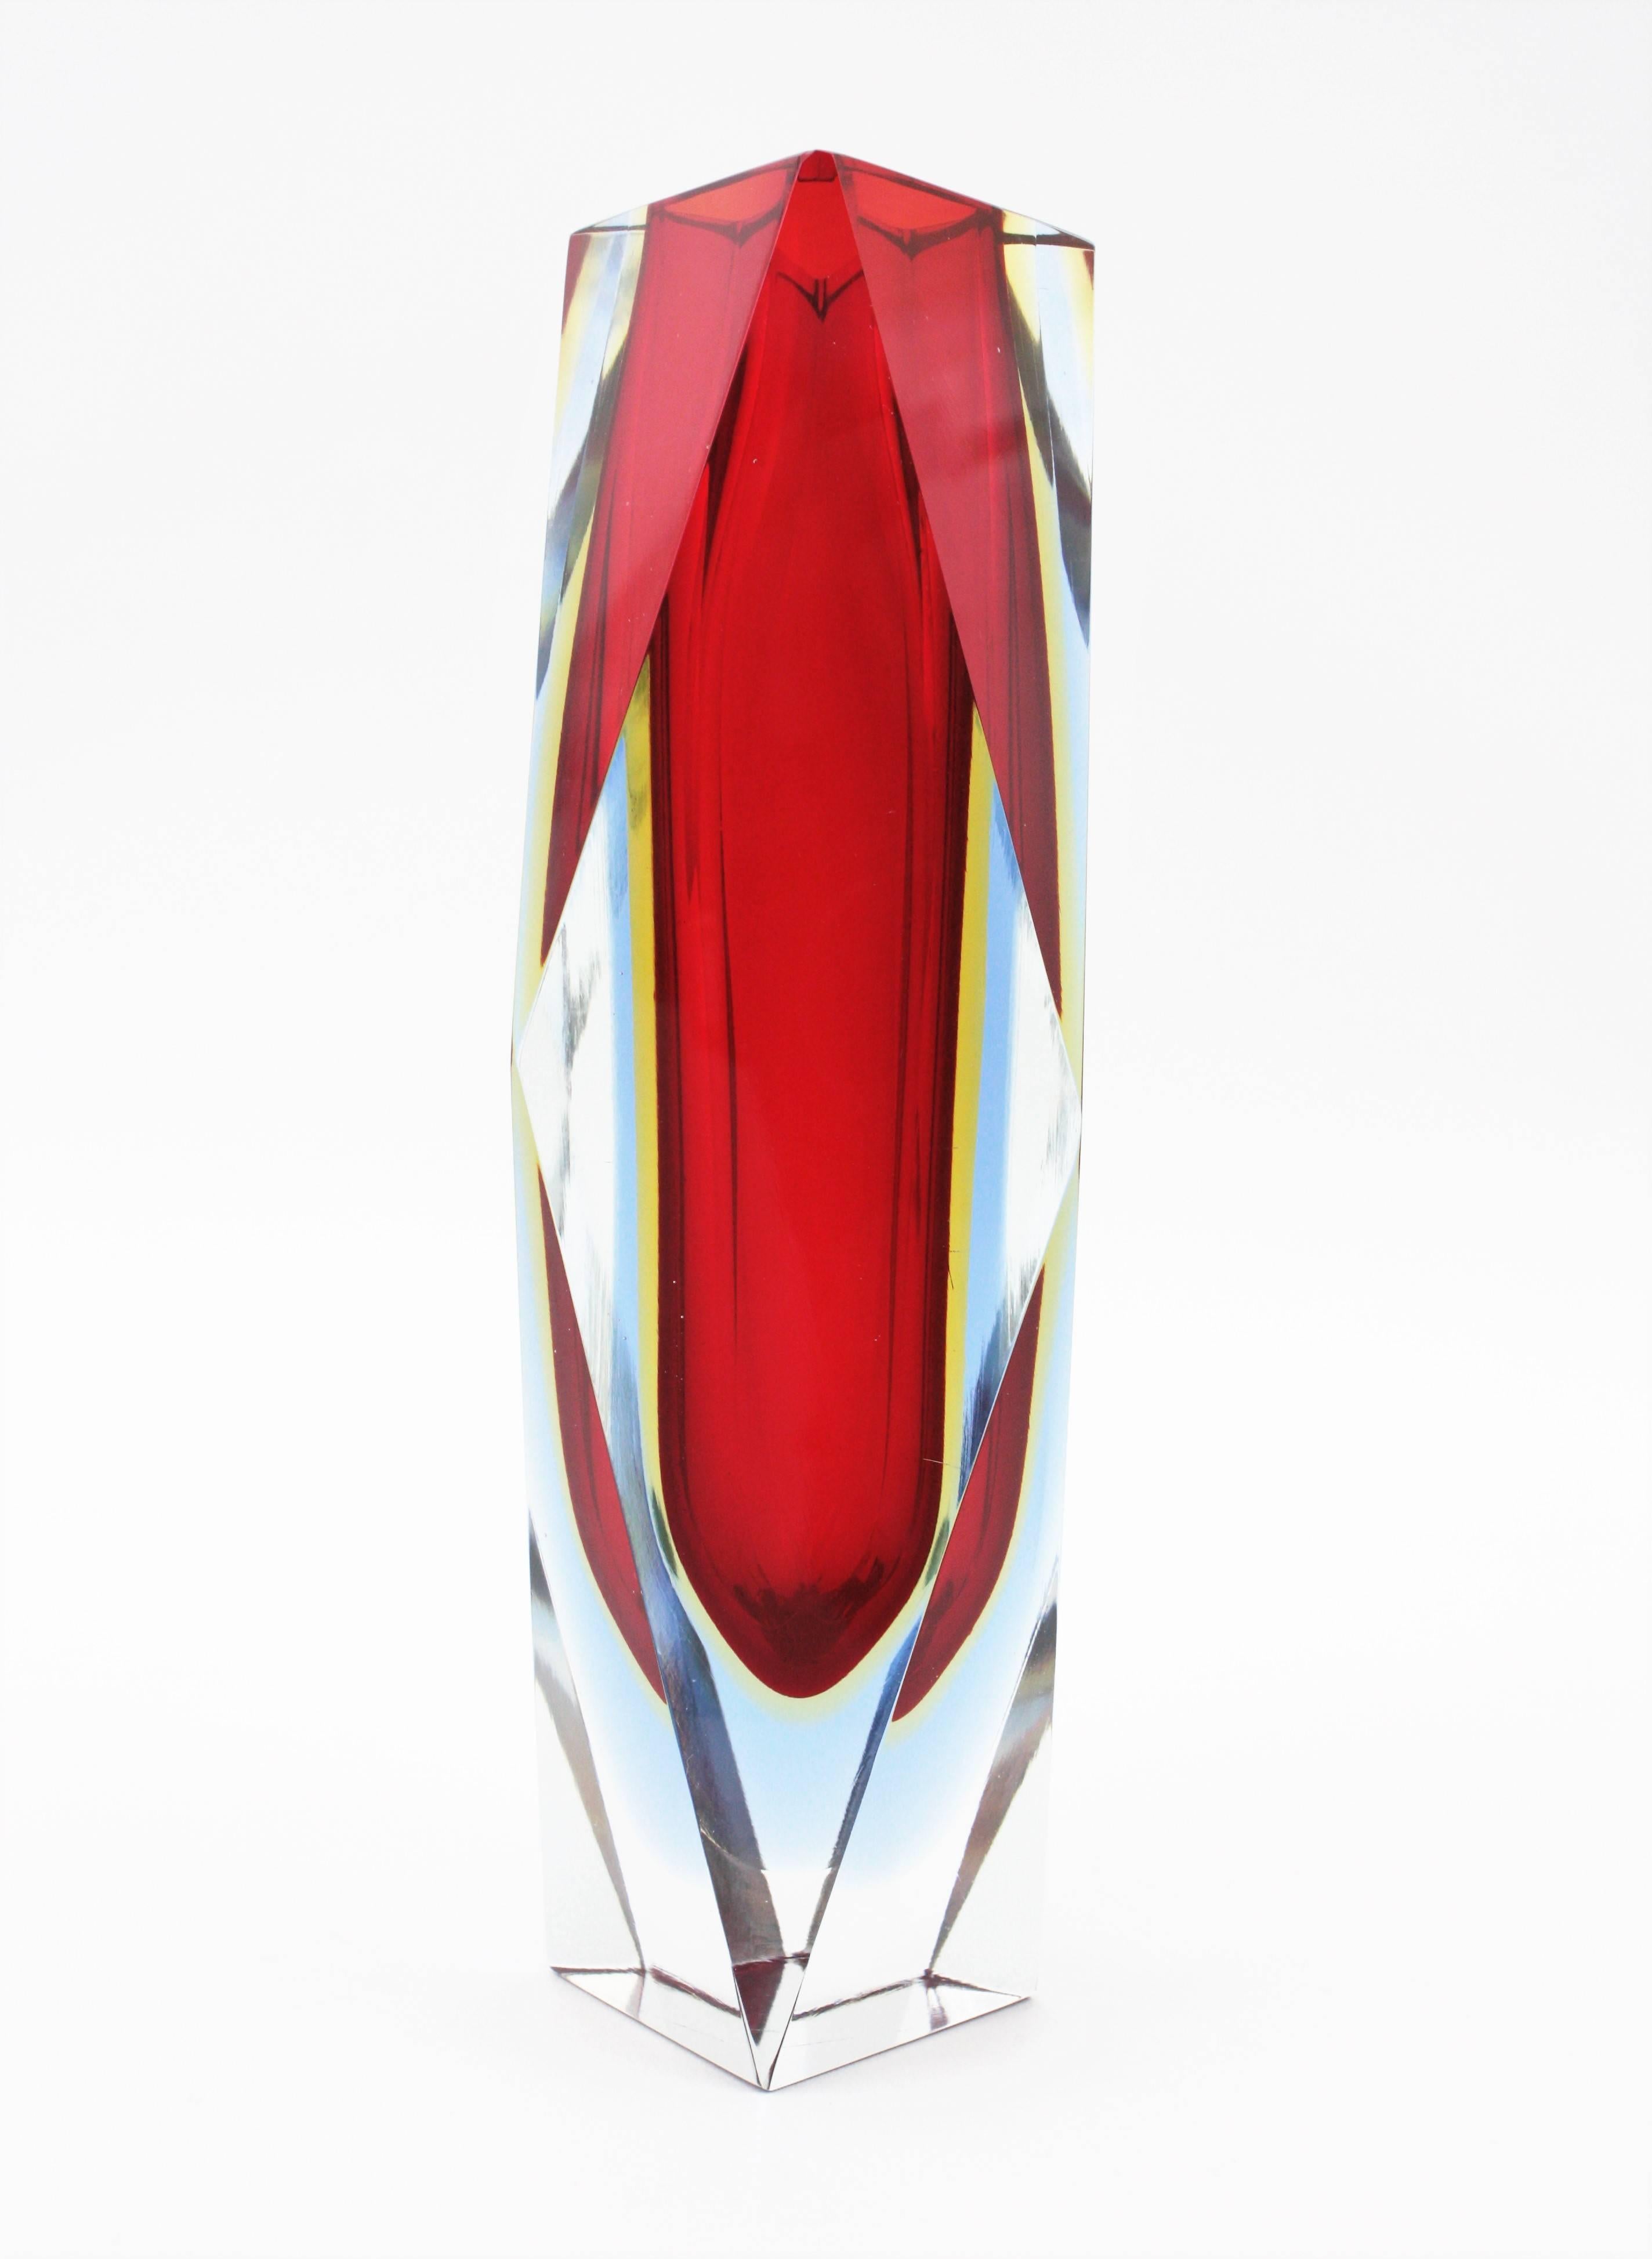 Mandruzzato Murano Sommerso Red, Blue, Yellow & Clear Faceted Glass Vase, 1960s For Sale 4